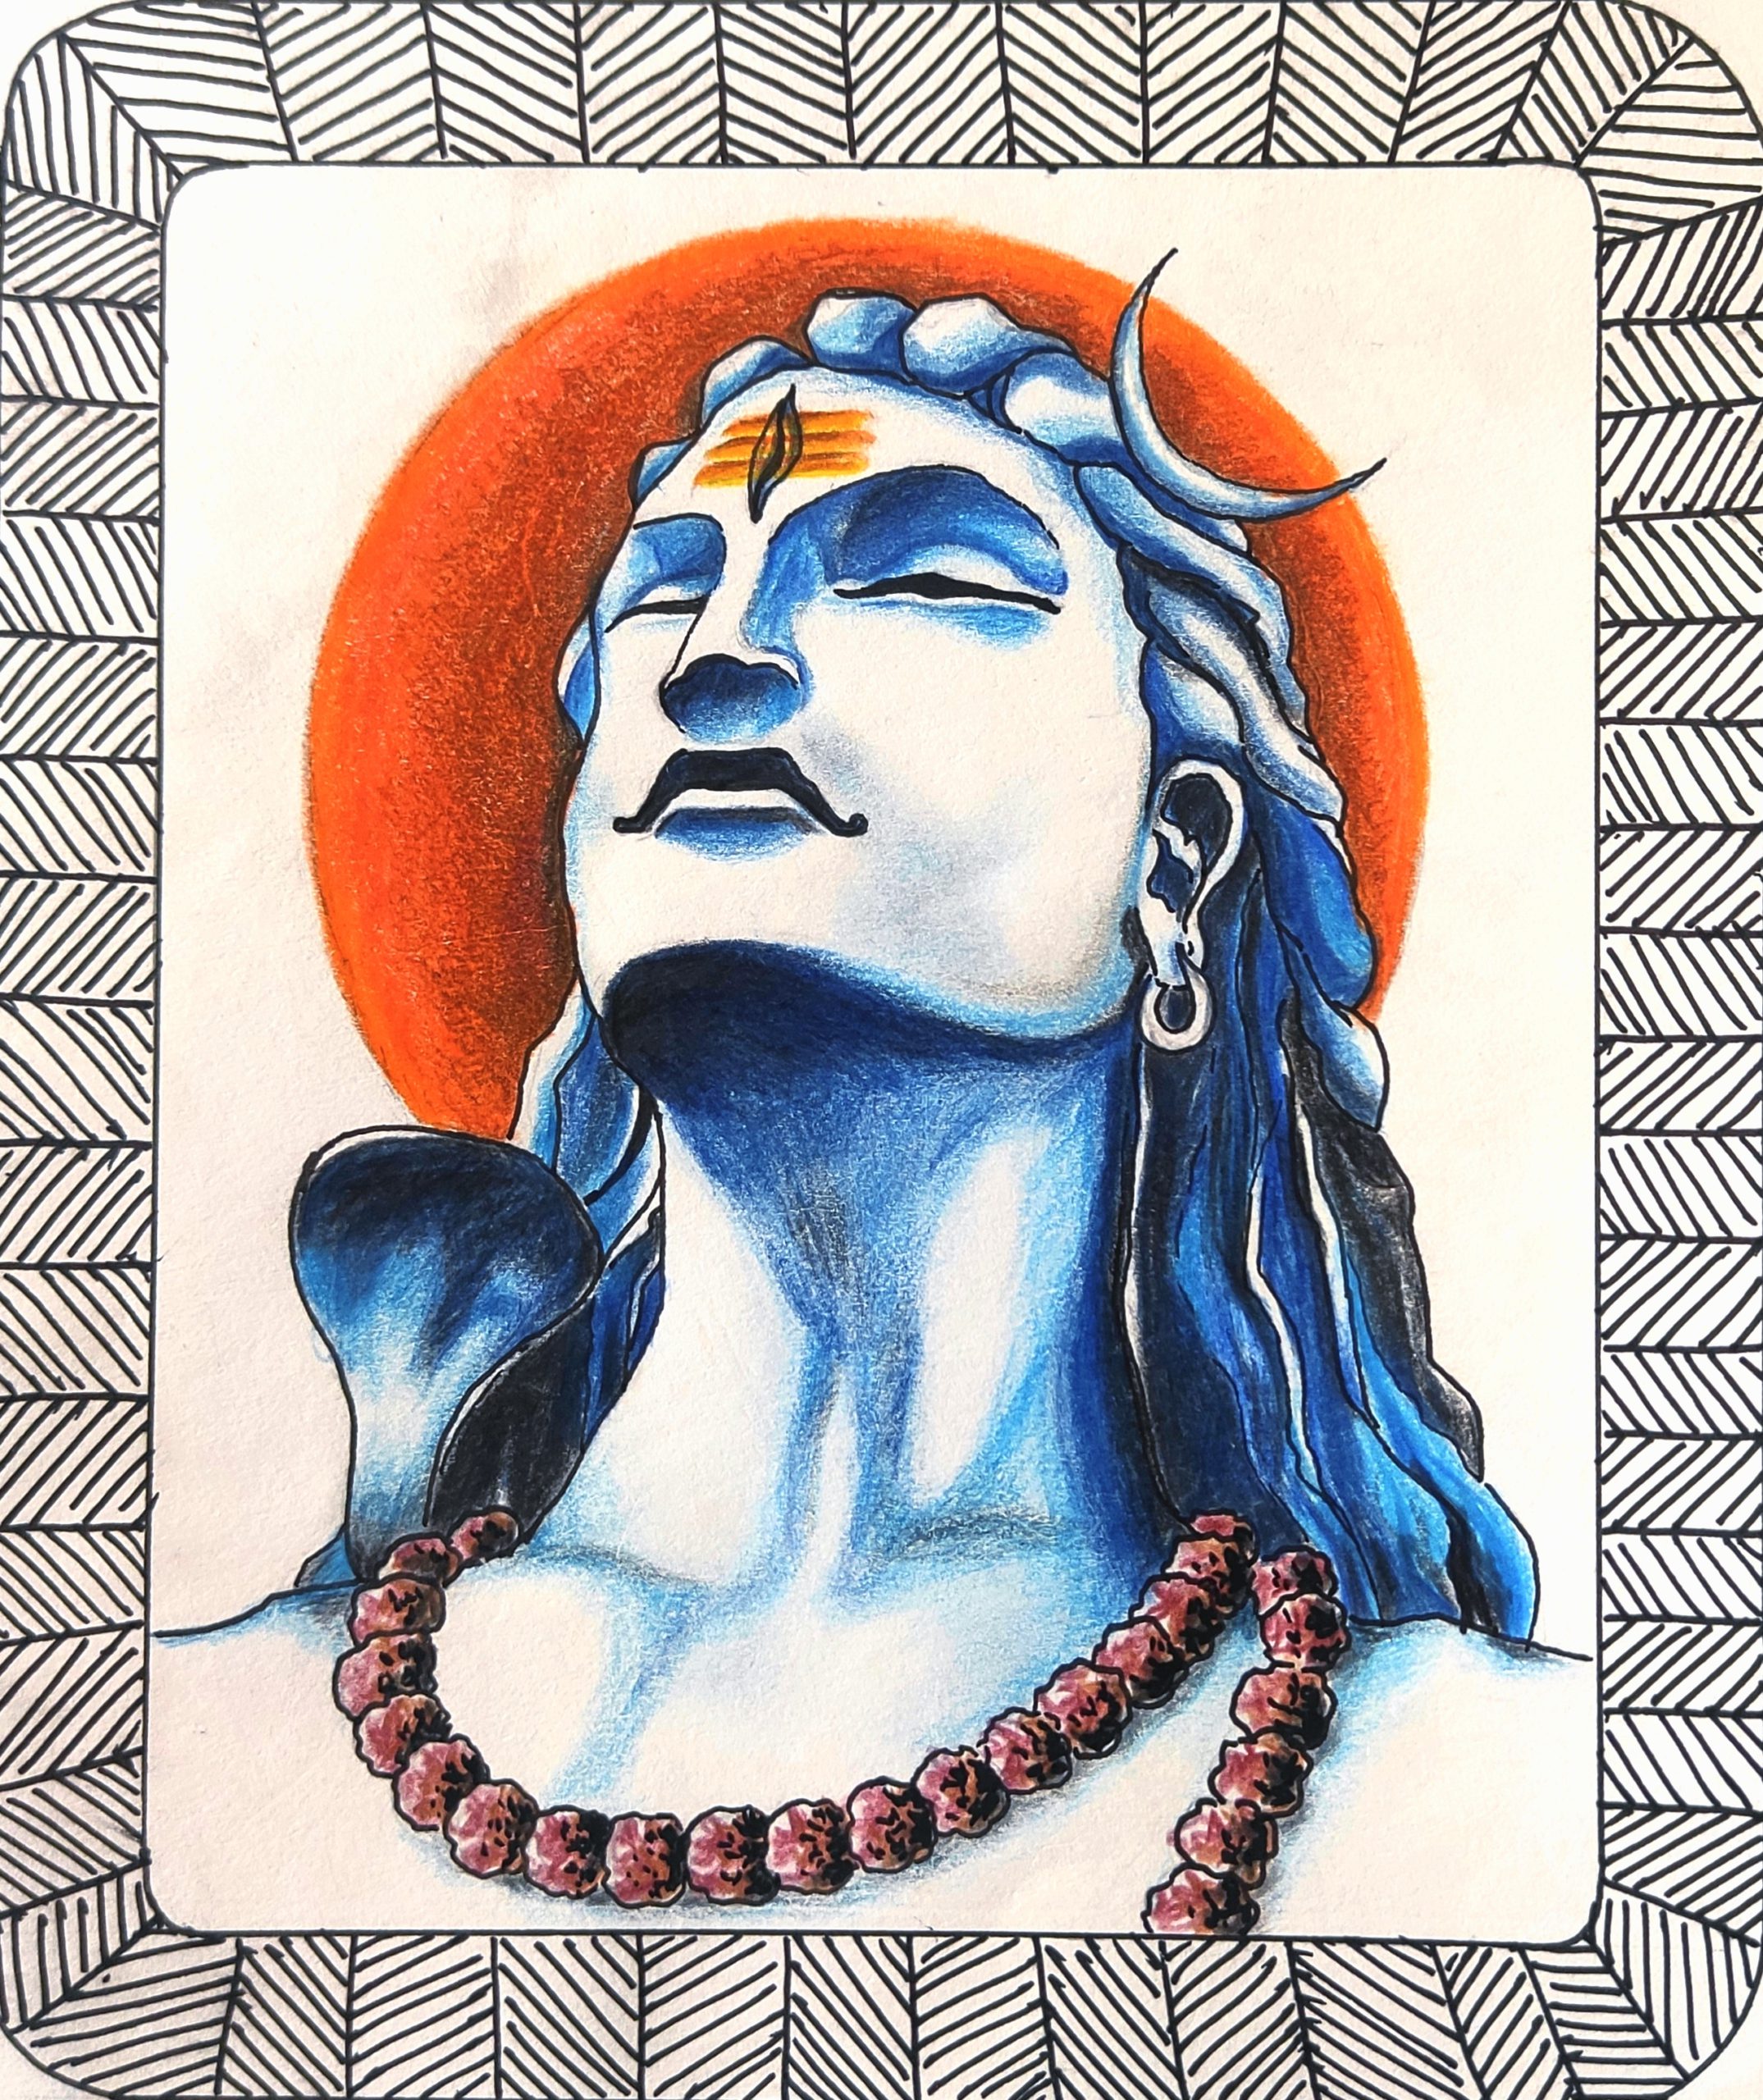 How to make a Lord Shiva drawing - Quora